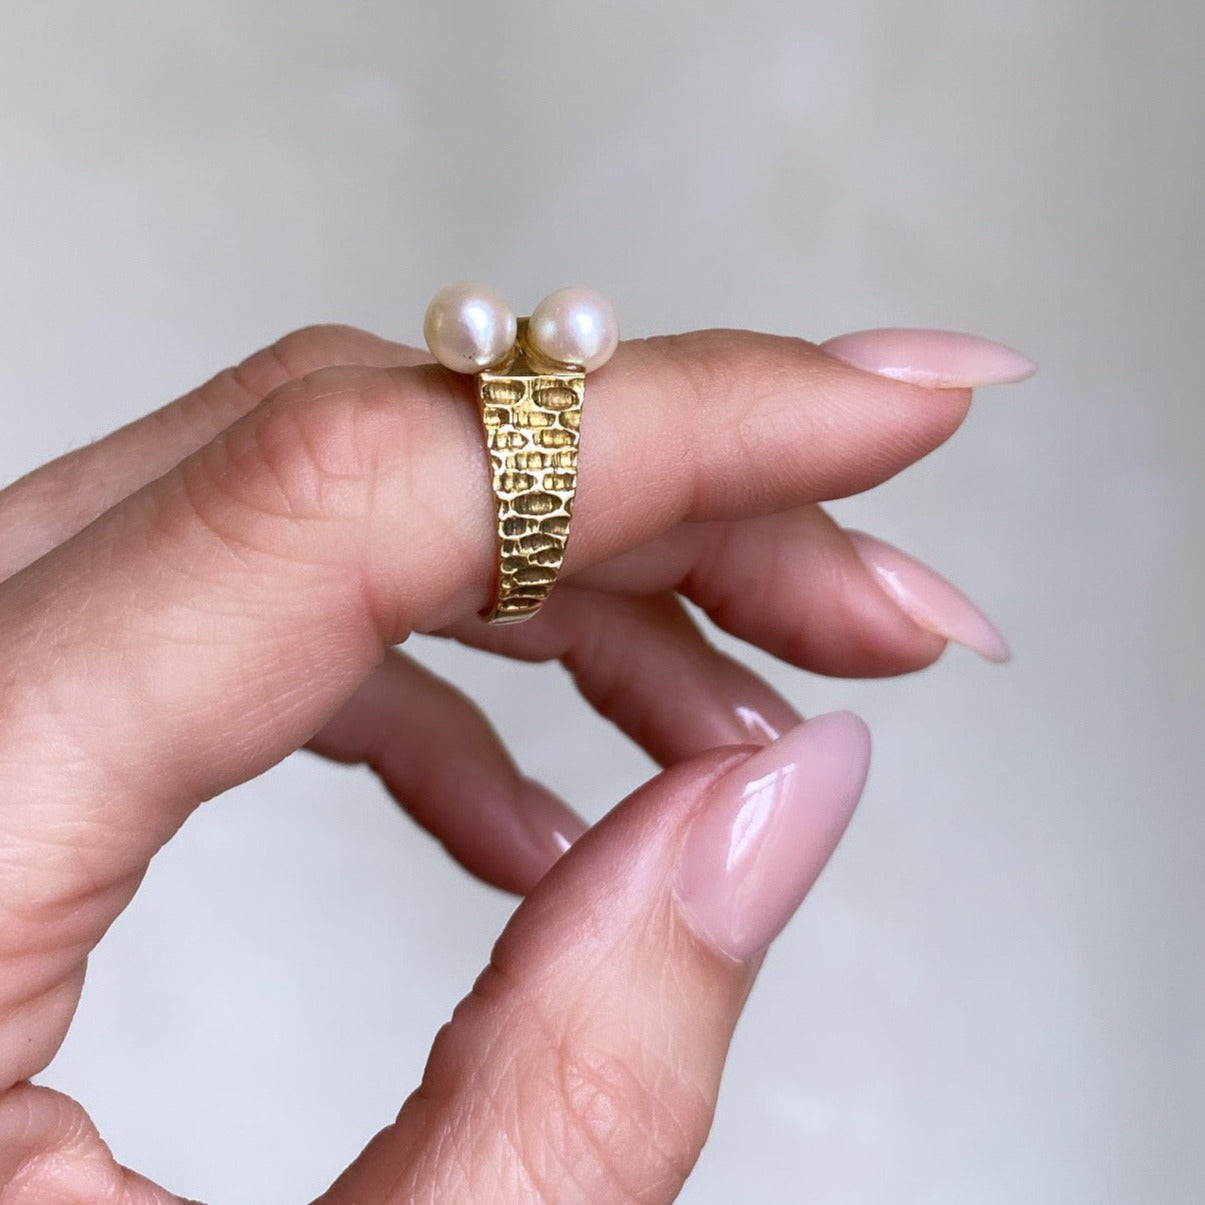 Vintage Double Pearl Ring